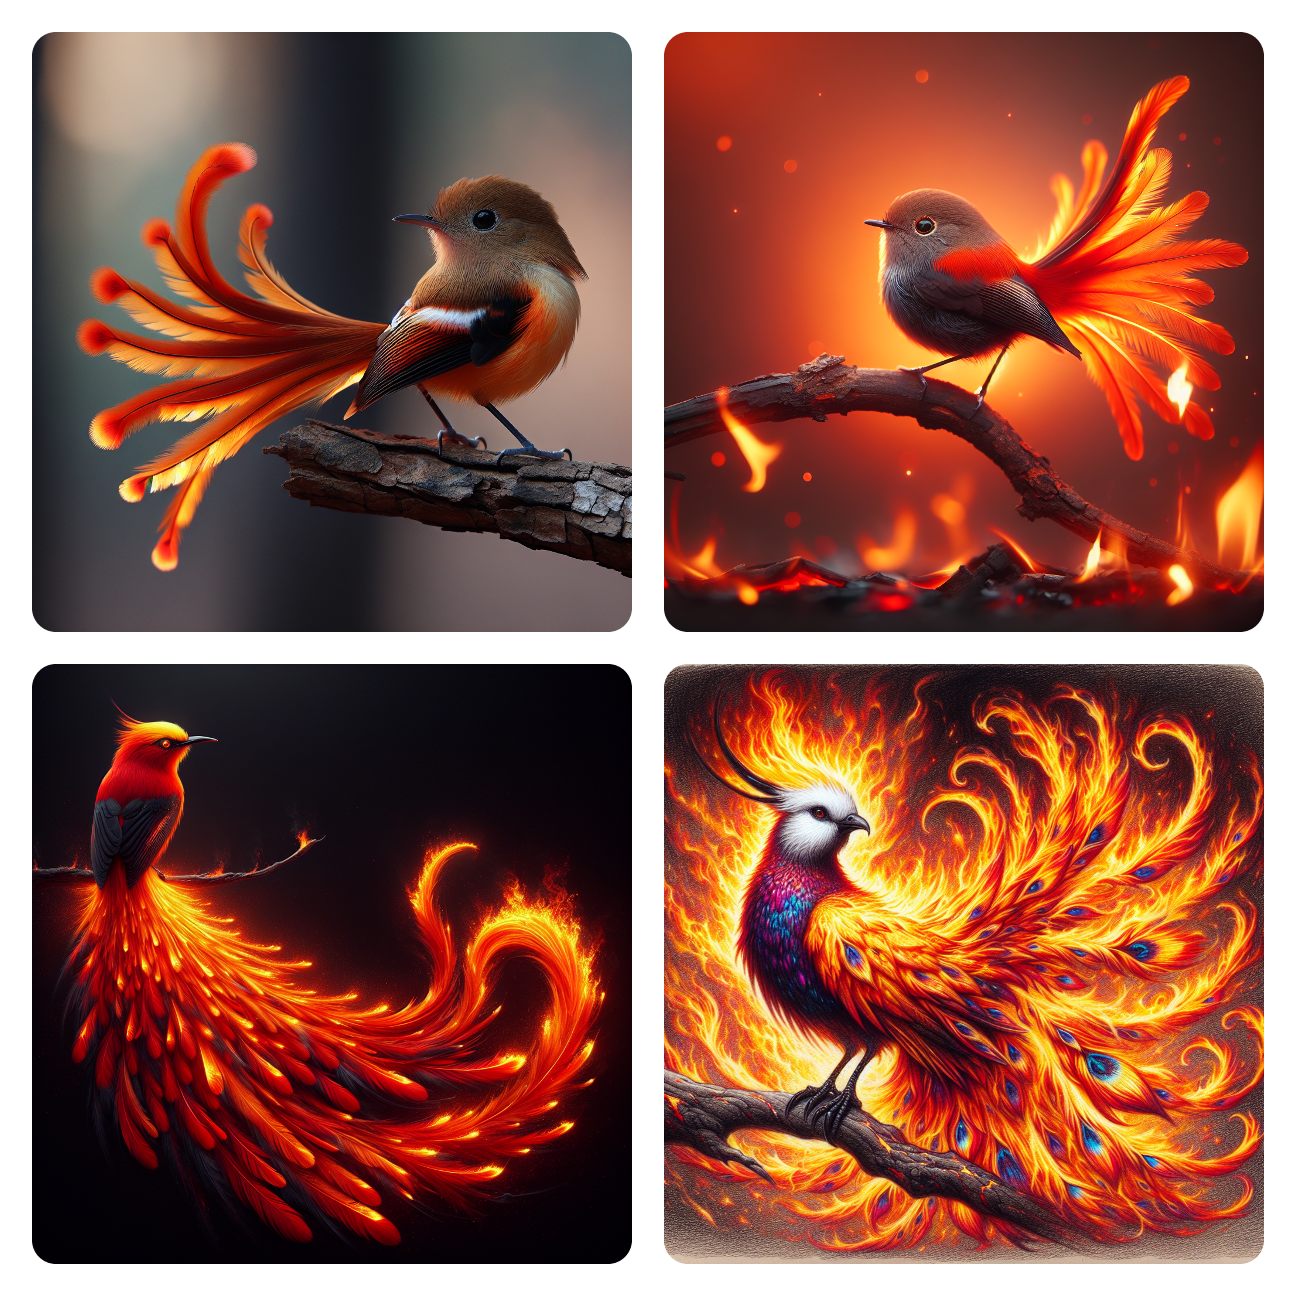 Image: When Your Tail Ignites: Bird on Fire!